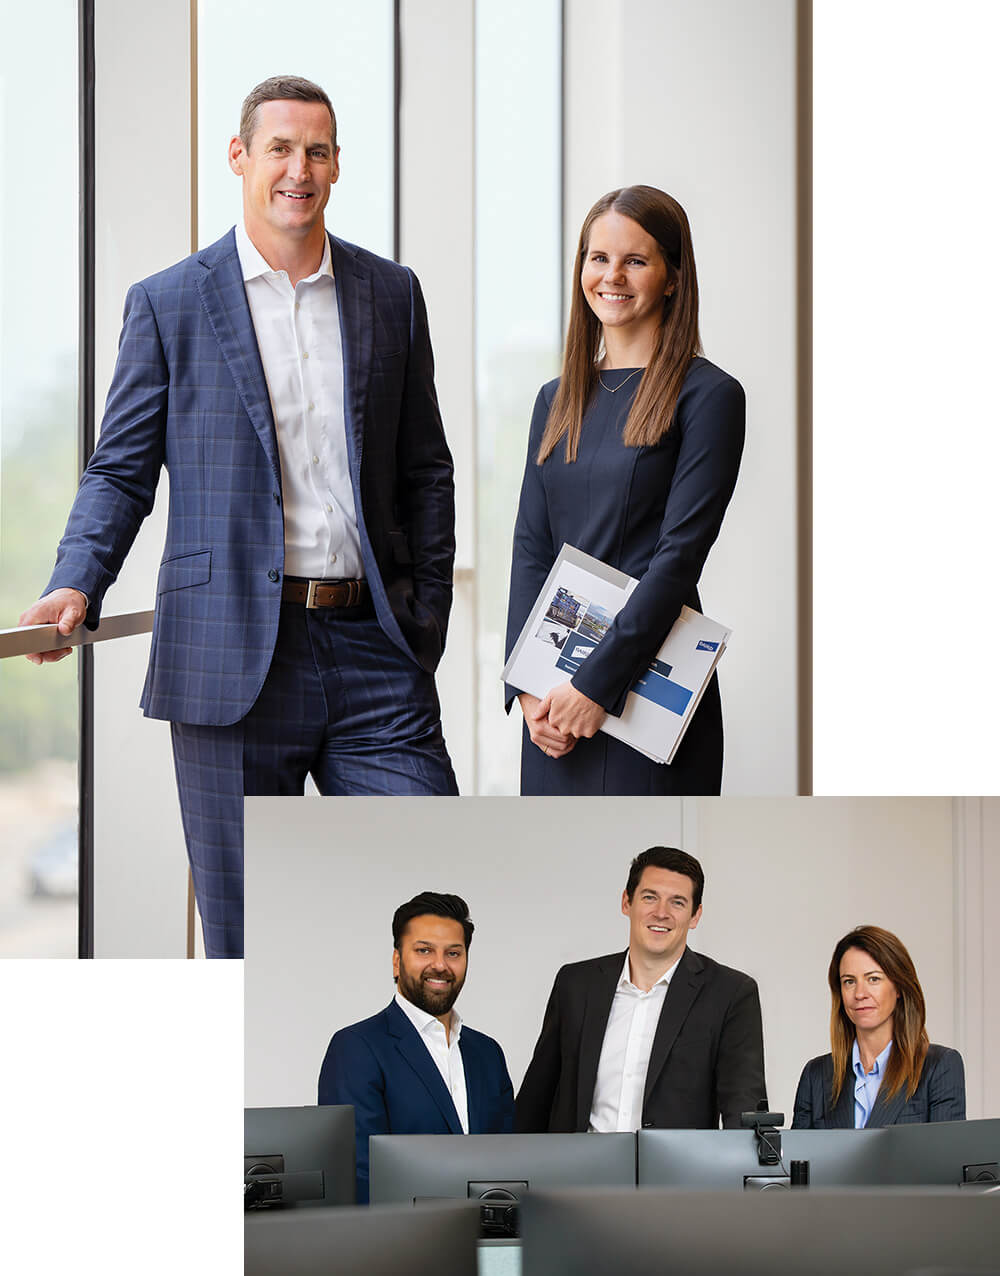 Two photos featuring associates in the Equities Capital Markets group in office settings